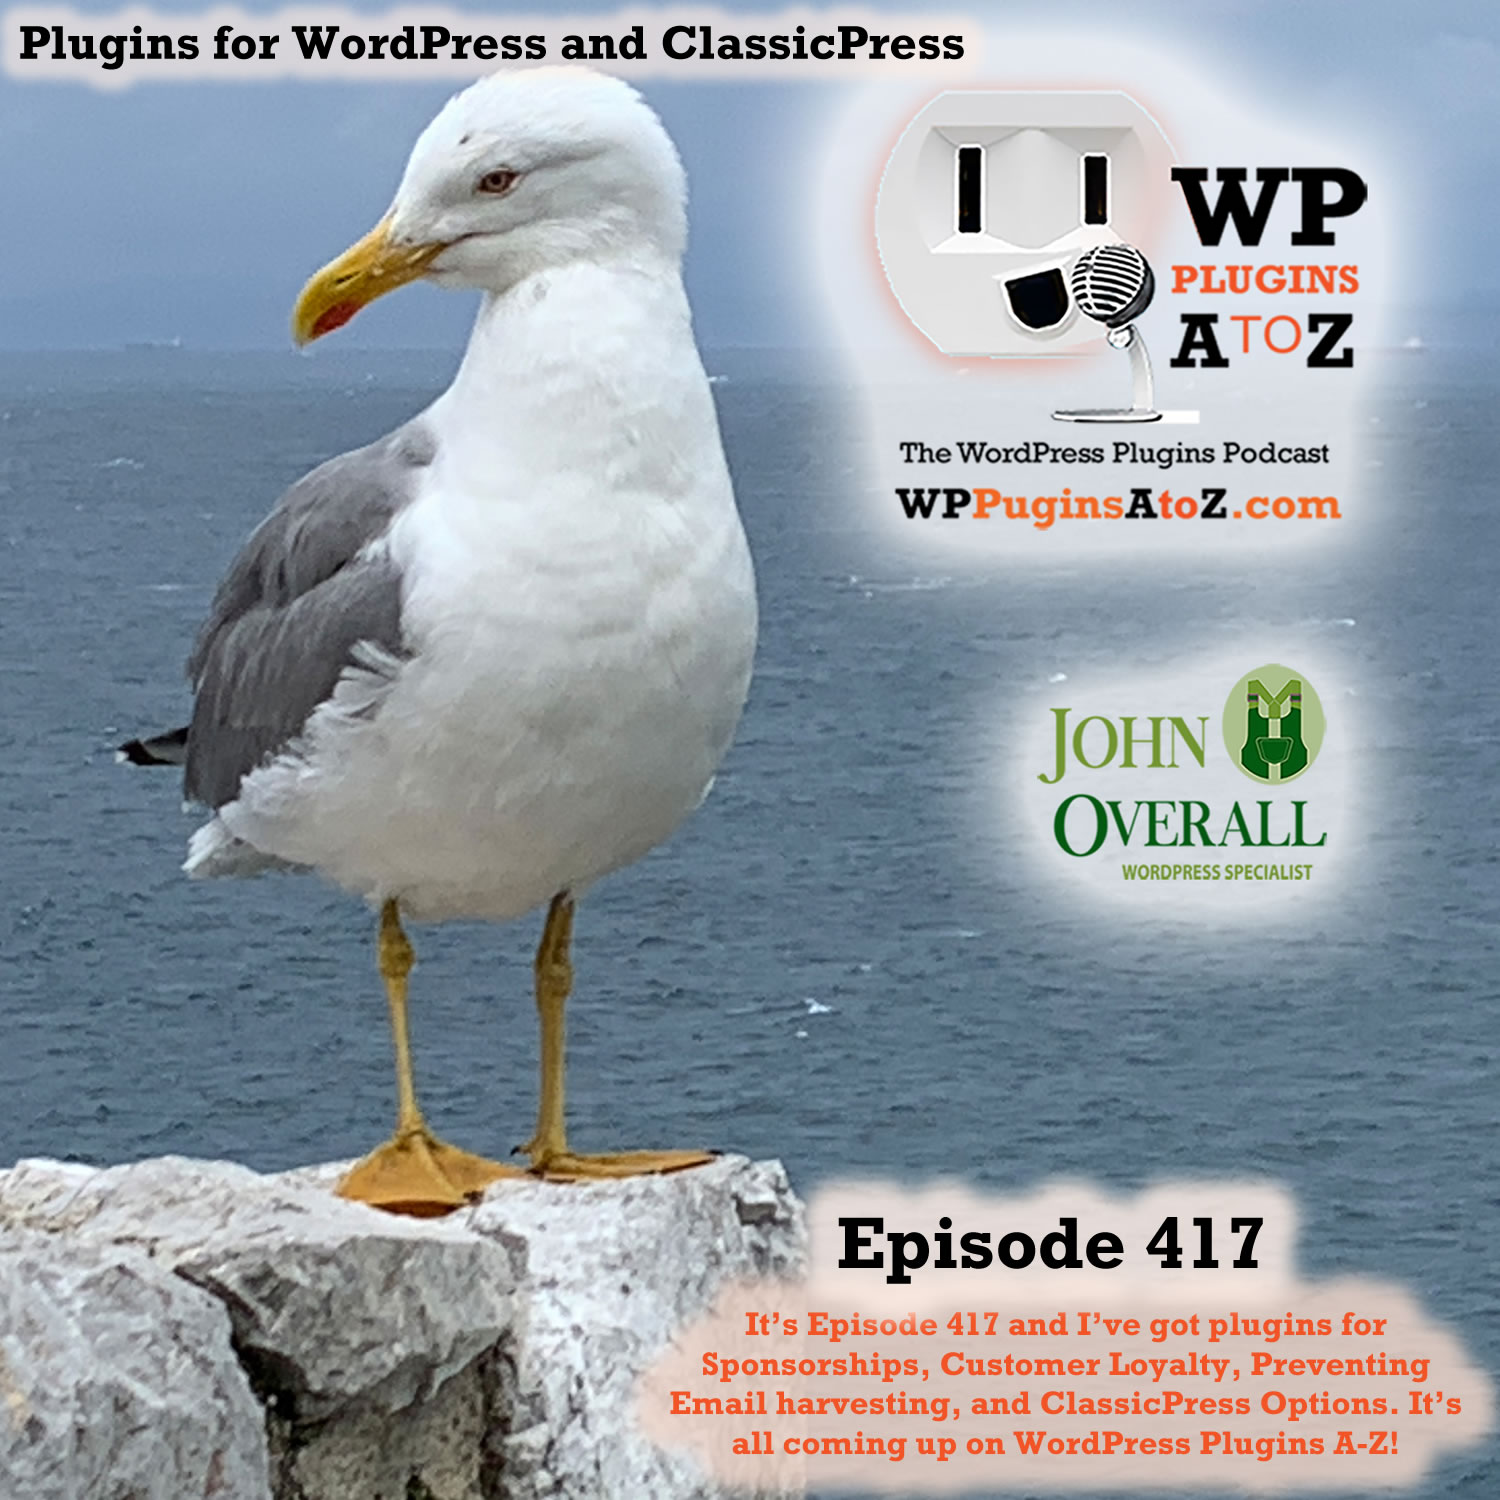 It's Episode 417 and I've got plugins for Sponsorships, Customer Loyalty, Preventing Email harvesting, and ClassicPress Options. It's all coming up on WordPress Plugins A-Z!